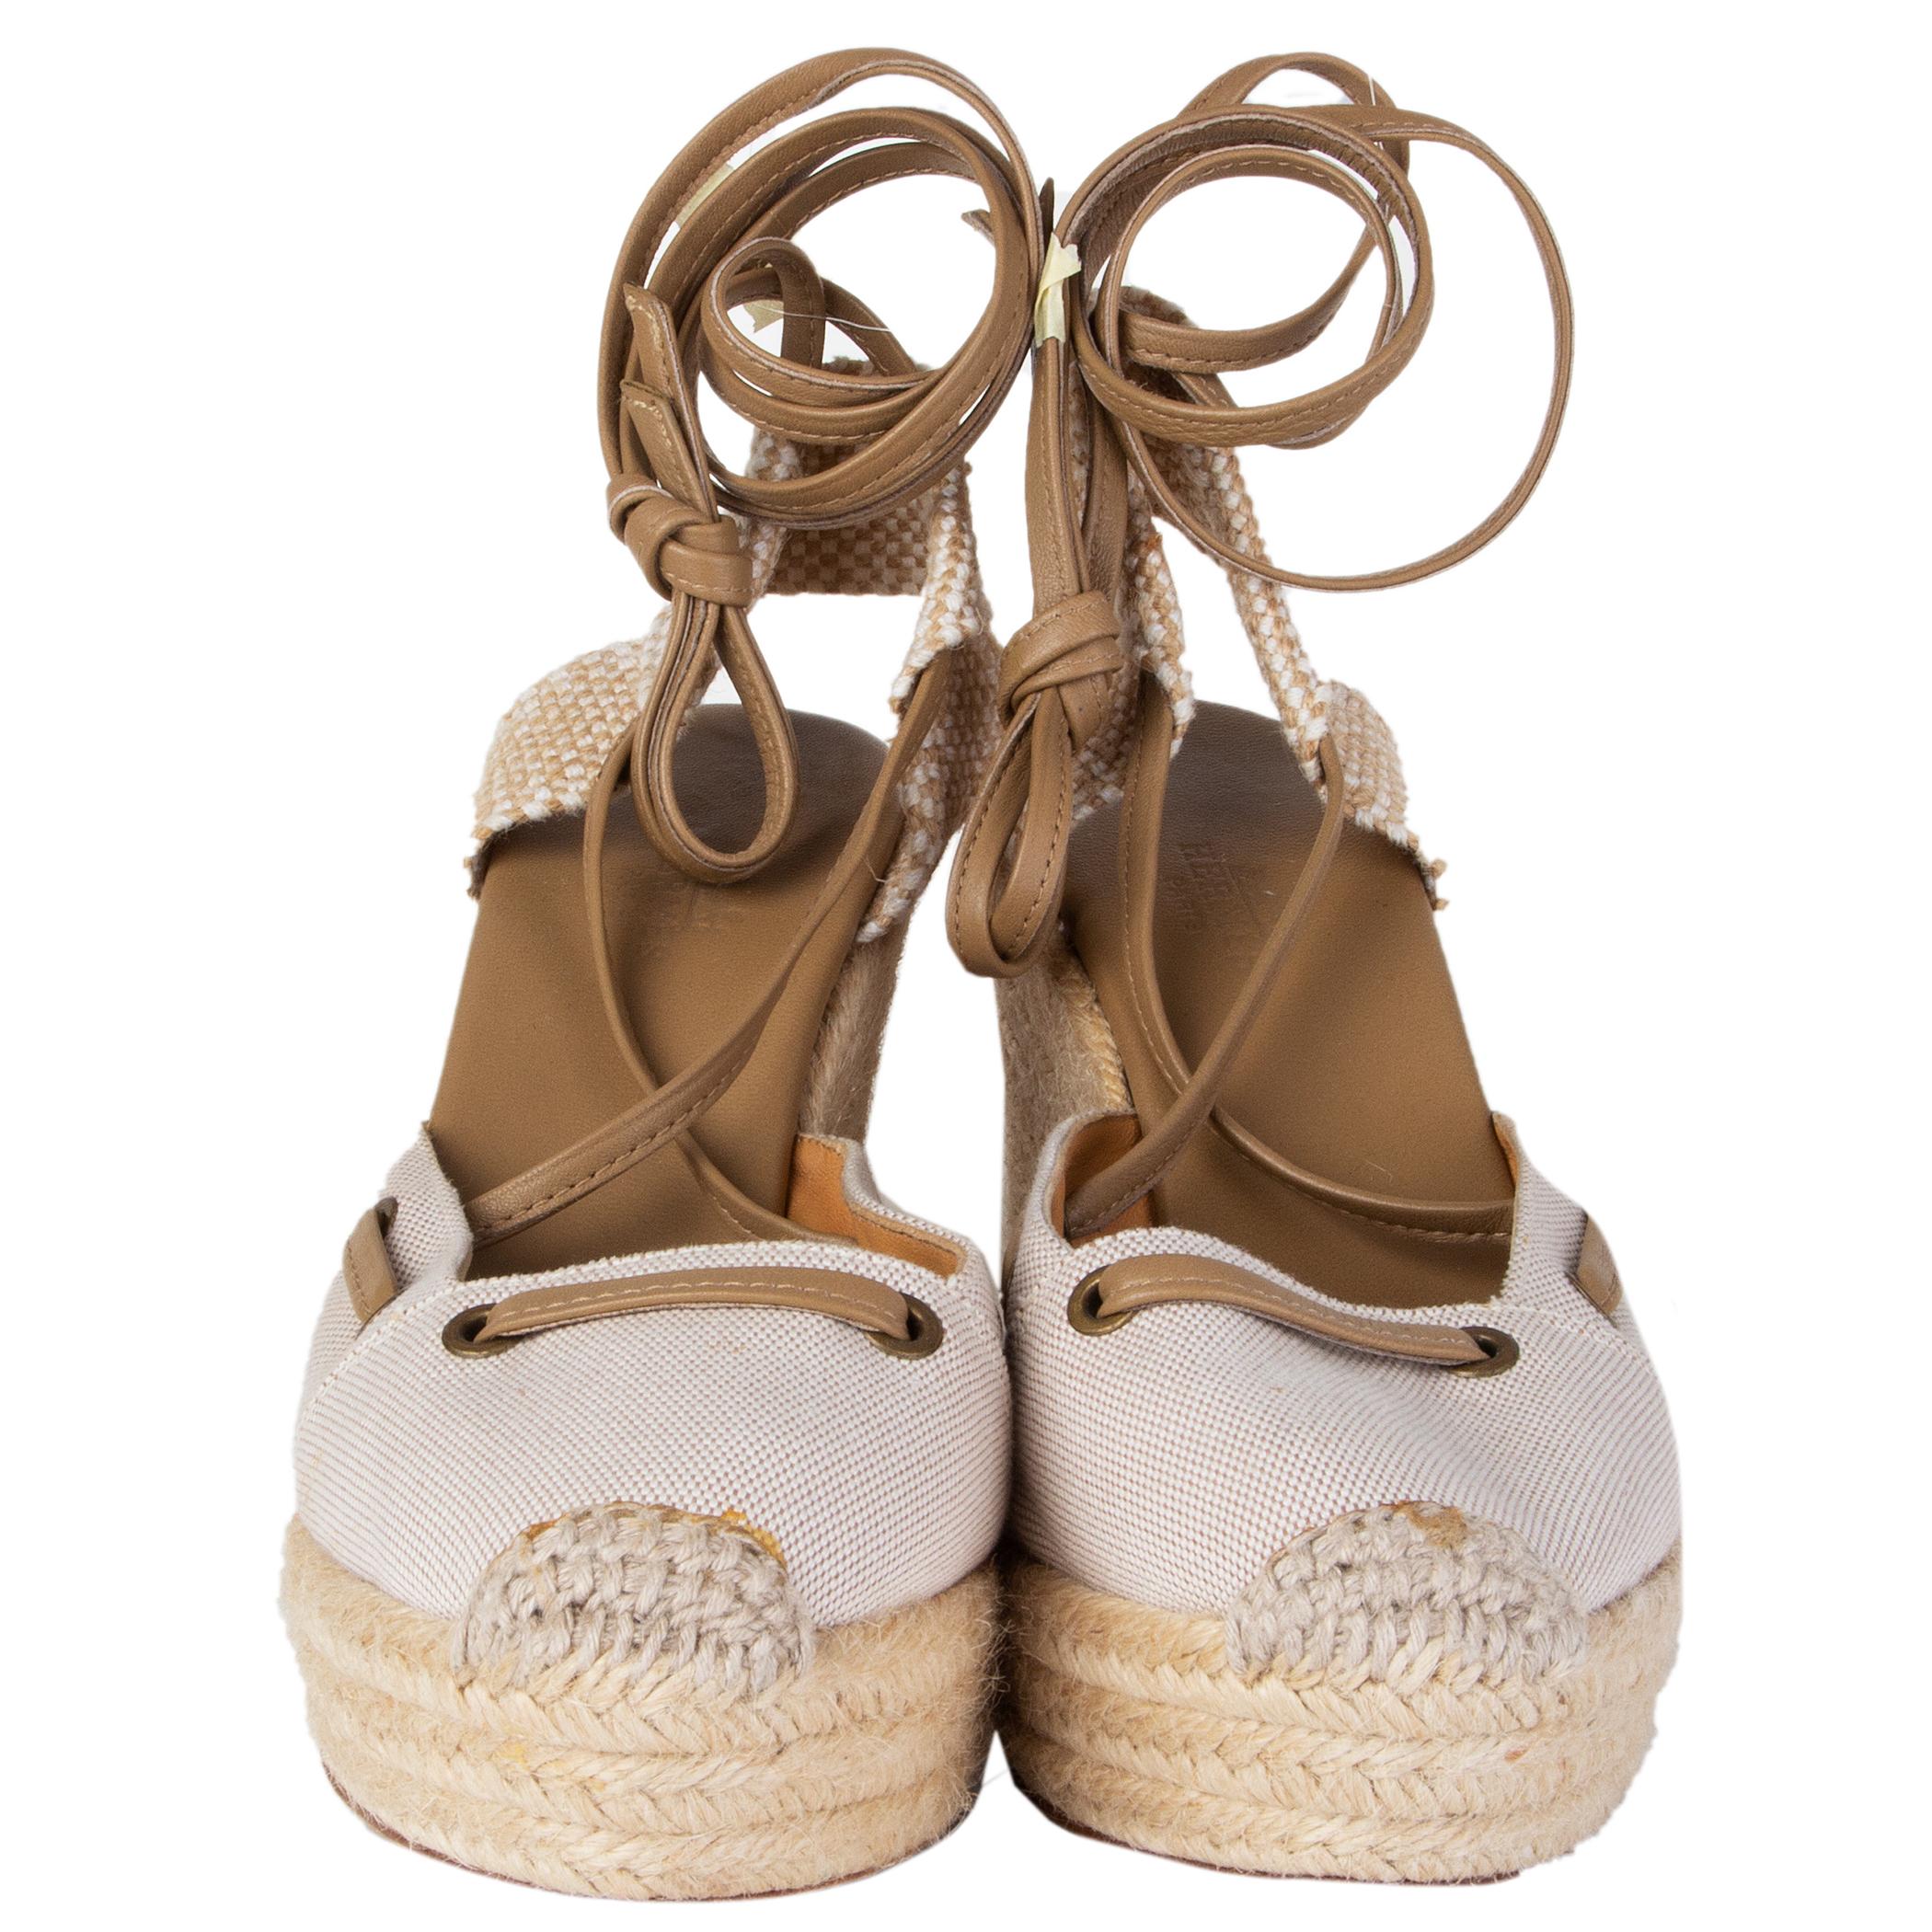 100% authentic Hermès espadrilles in off-white canvas and raffia featuring lace-up leather strapes in khaki. Have been worn with some faint glue stains on the tip. Overall condition is excellent. 

Measurements
Imprinted Size	39
Shoe Size	39
Inside